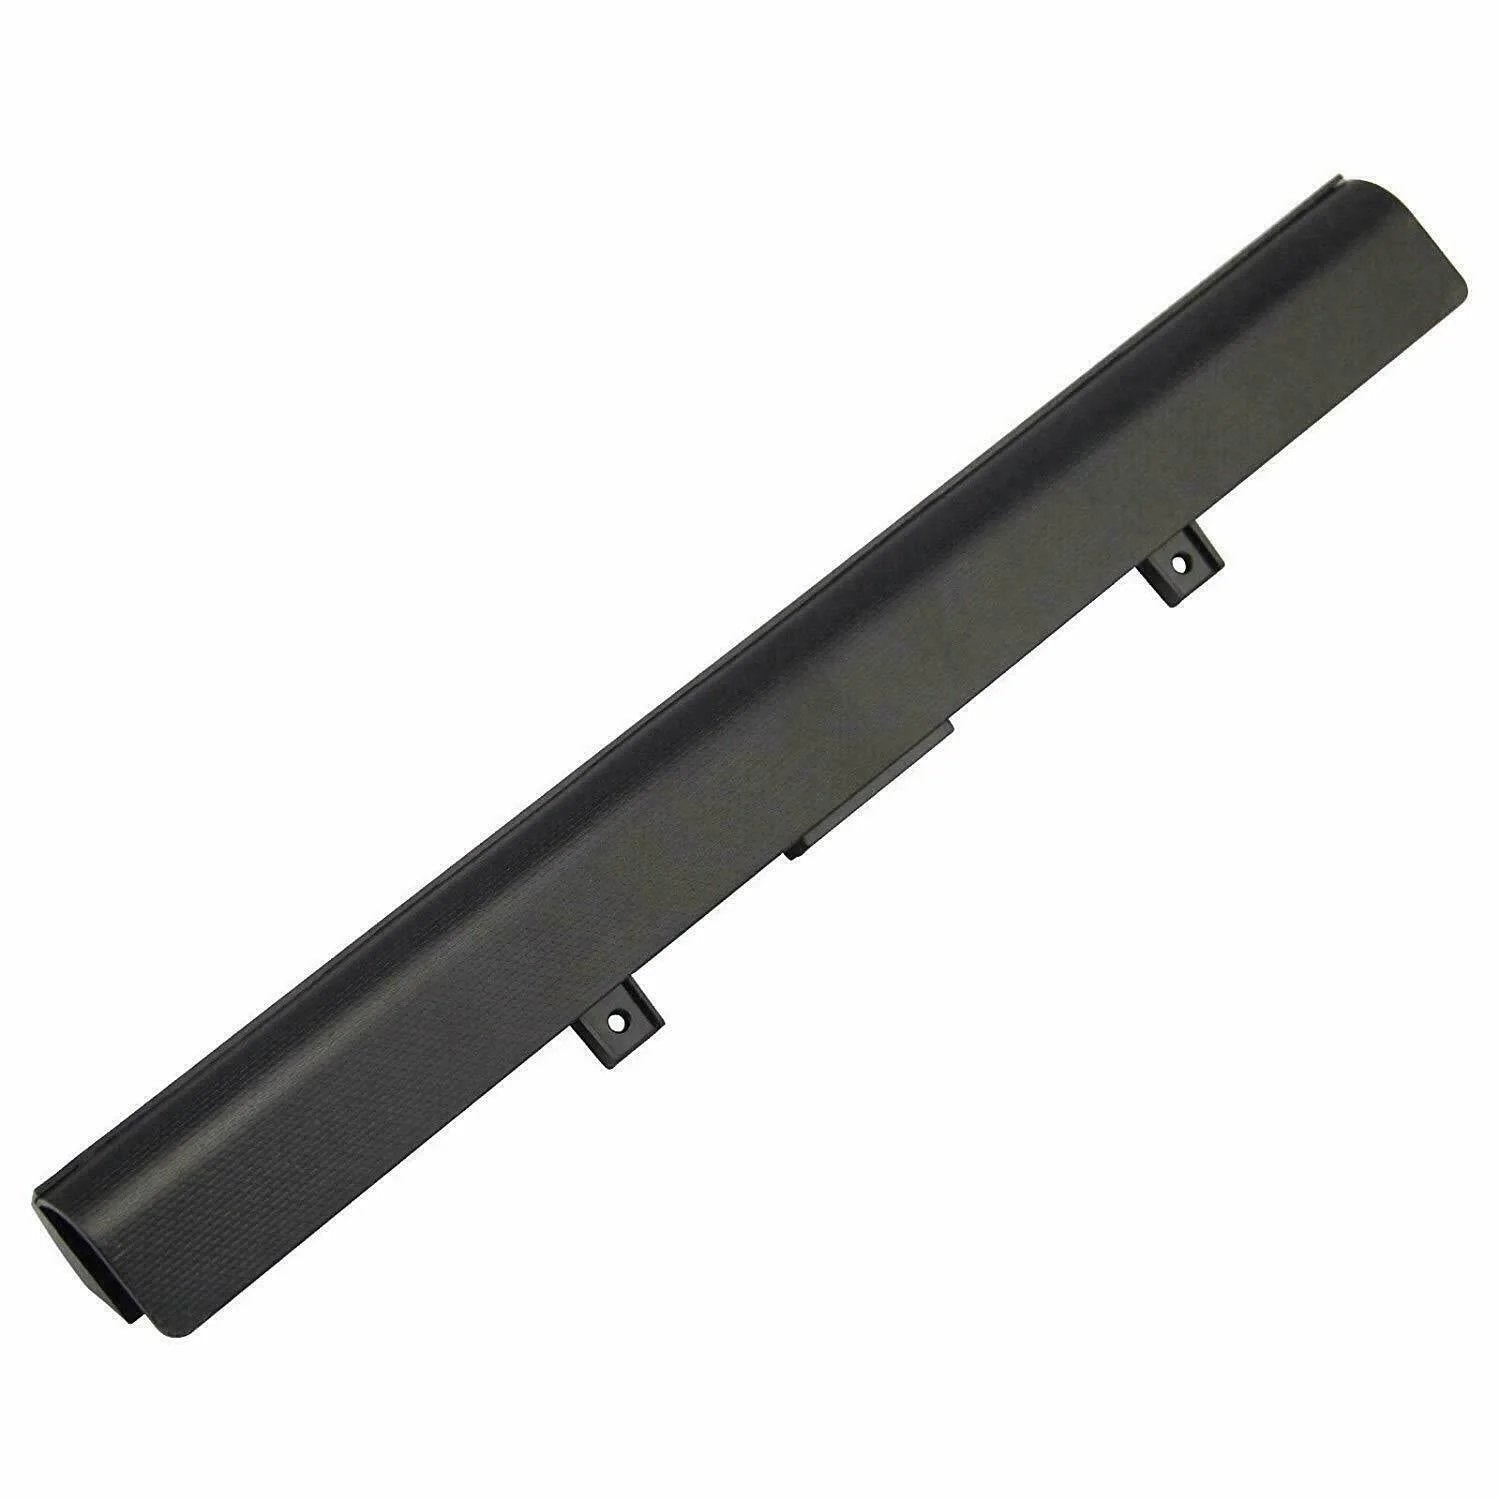 Replacement compatible battery for TOSHIBA PA5185U-1BRS PA5186U-1BRS for C55 C55D C55T Notebook - Office Catch